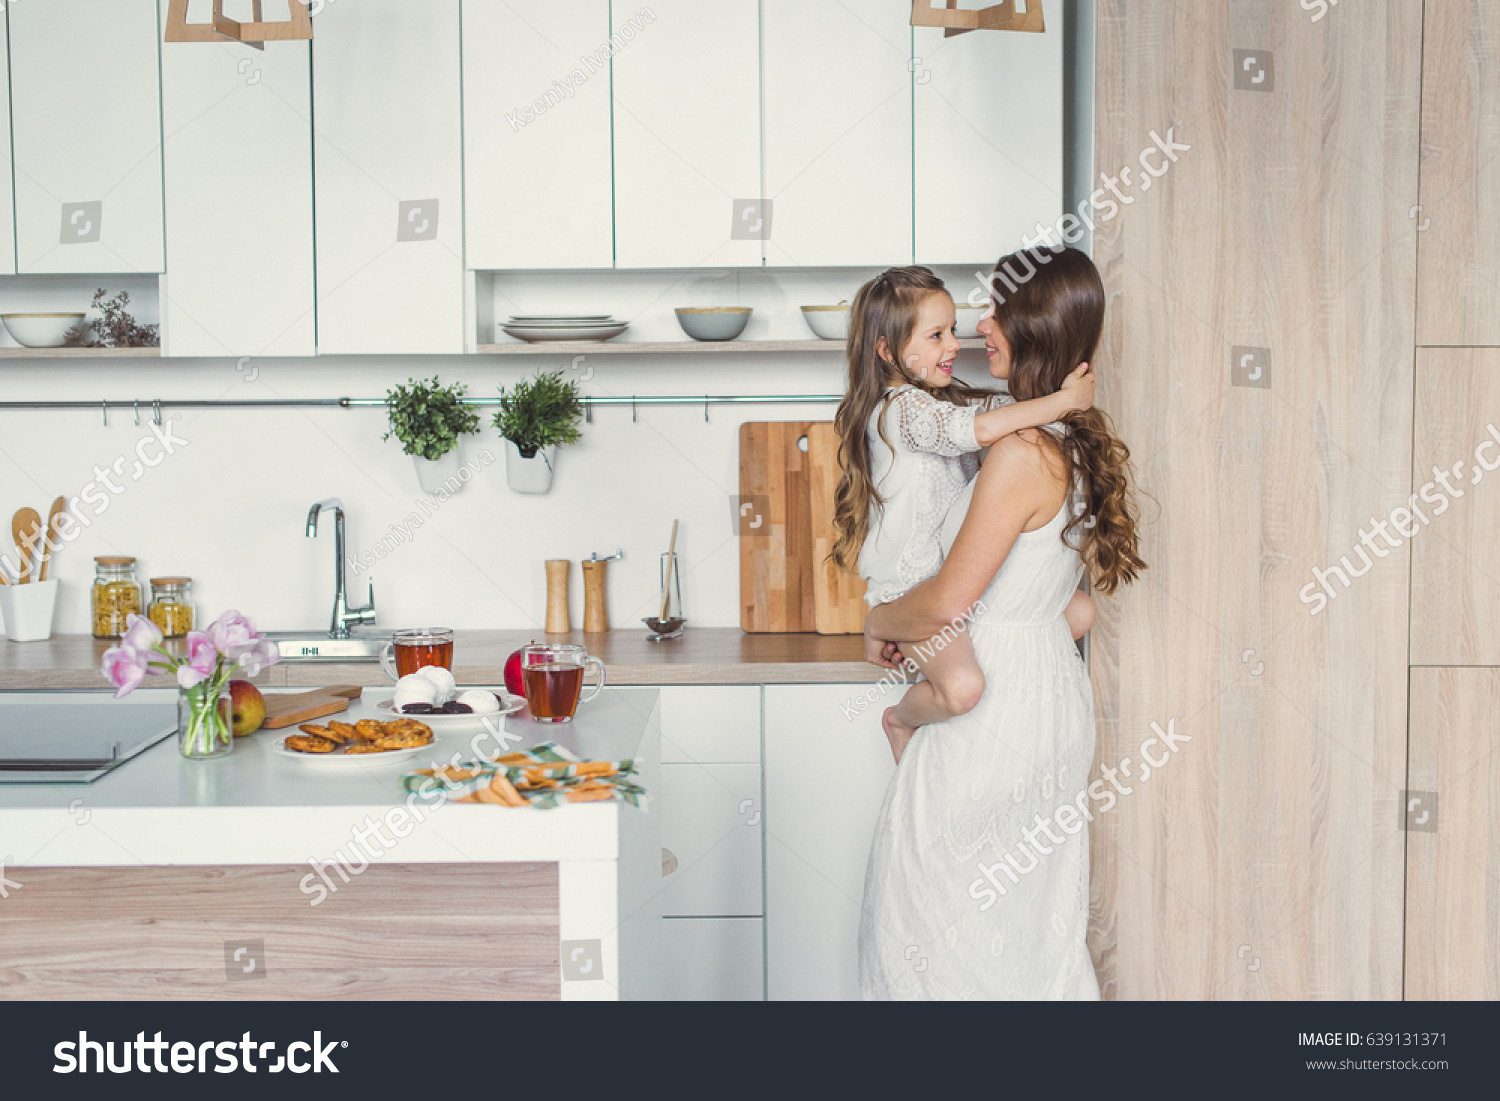 Mom and daughter in the kitchen. Daughter hugging mother on the kitchen. #639131371